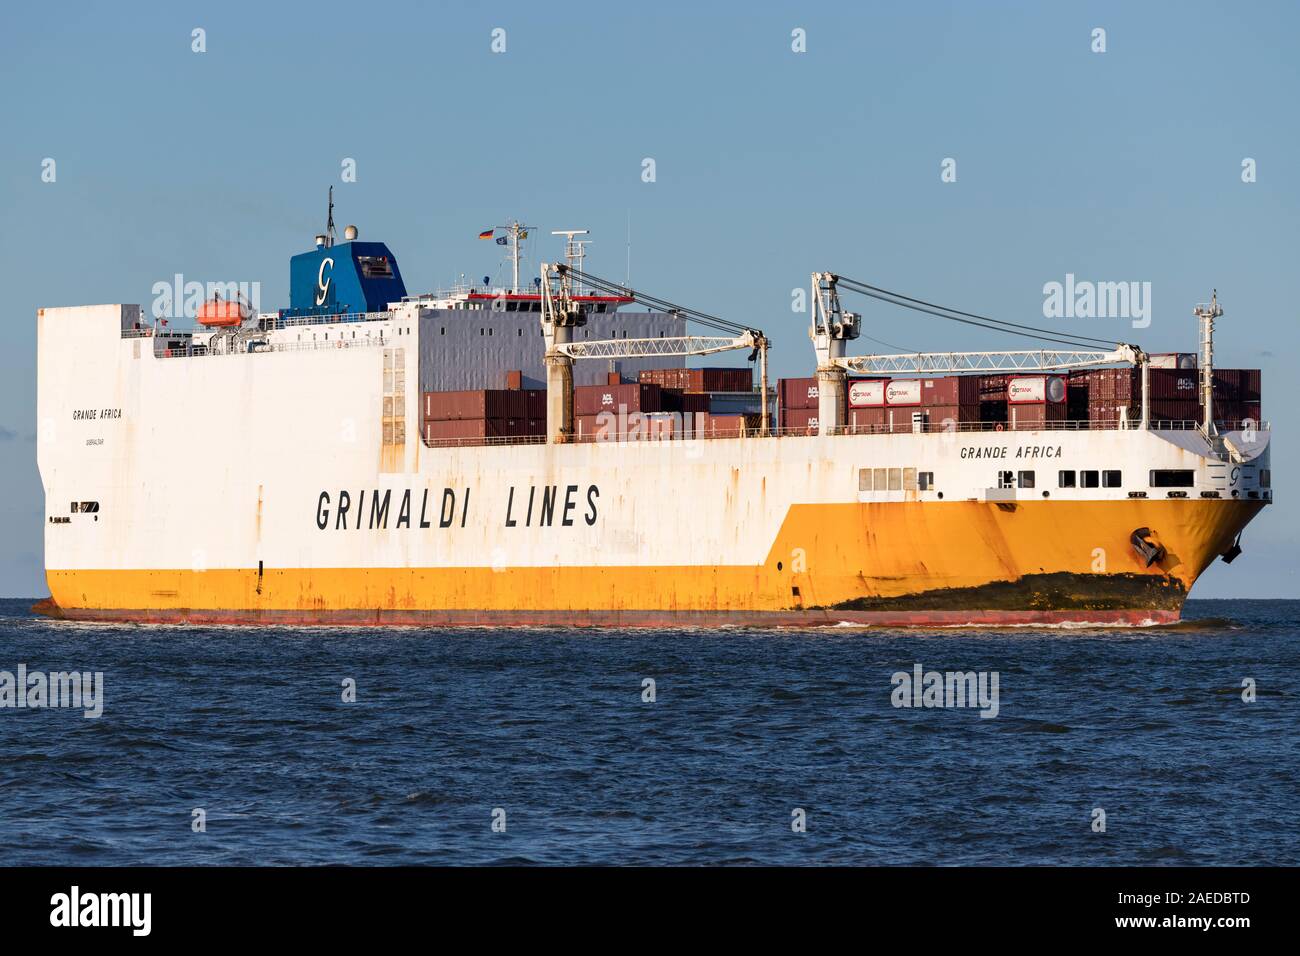 Grimaldi Lines ConRo ship GRANDE AFRICA on the river Elbe. The Grimaldi Group is a private shipping company based in Naples, Italy. Stock Photo